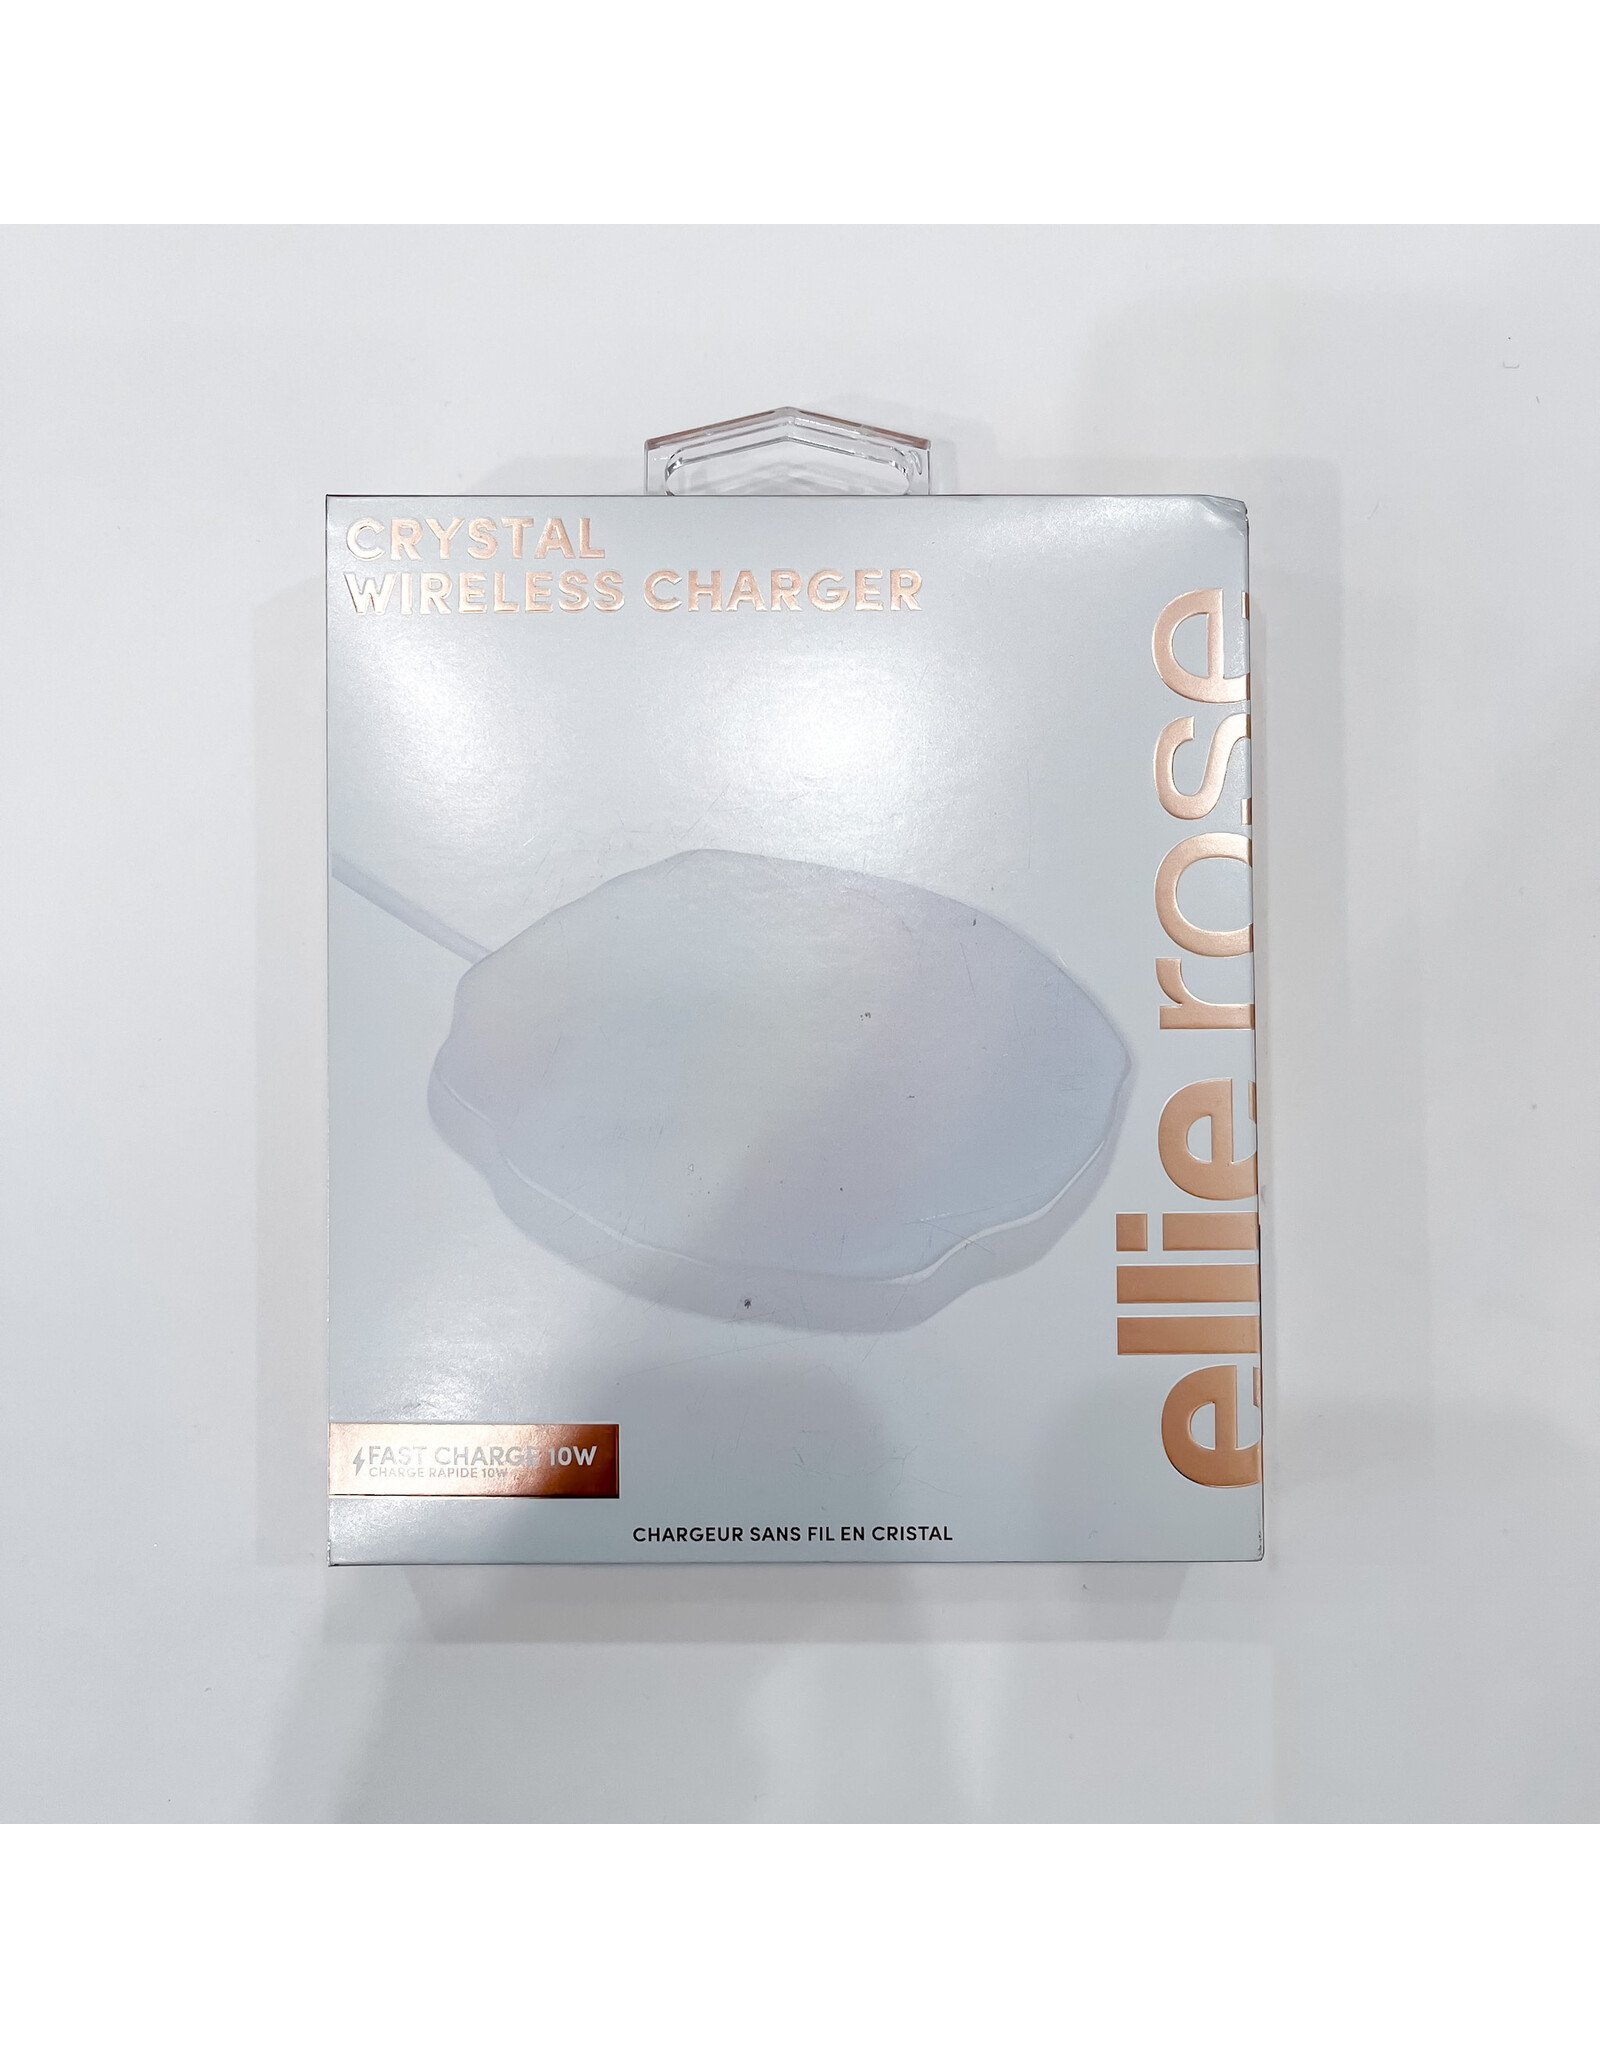 Quartz Crystal Wireless Charger